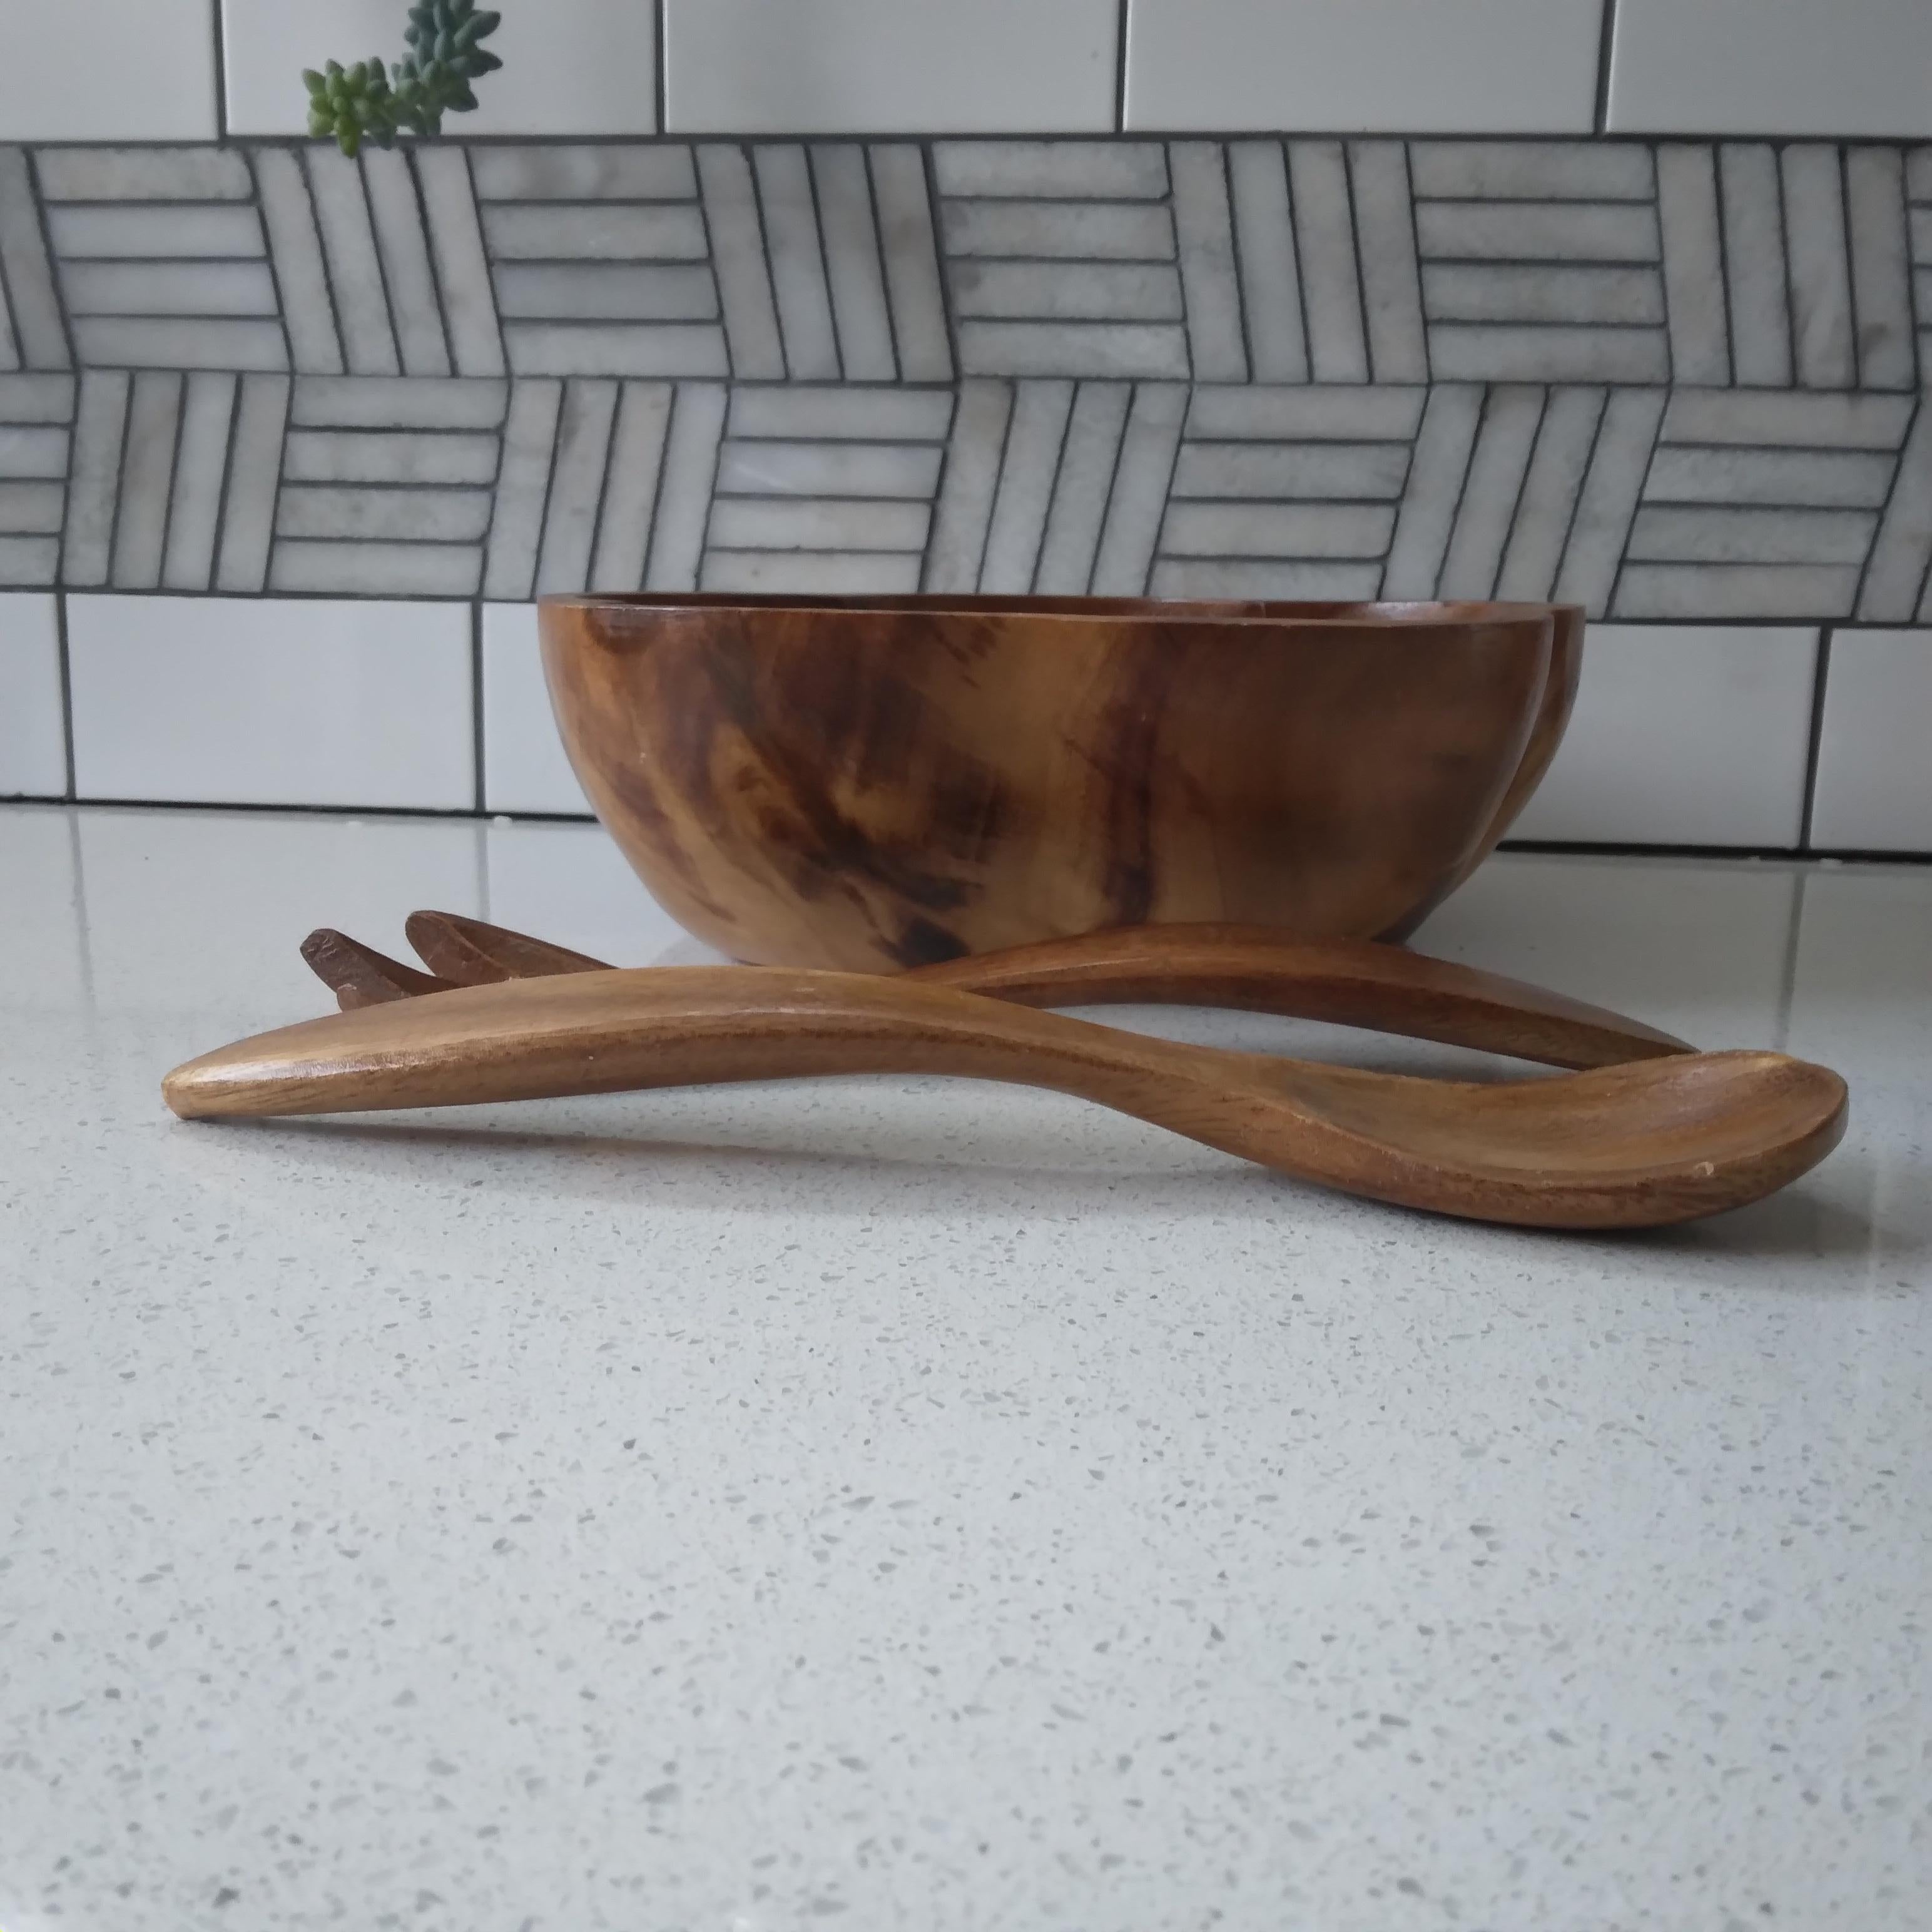 Gorgeous woodgrain and an adorable floral shape, this salad bowl with servers is a great way to add natural beauty to your dinnerware collection. 